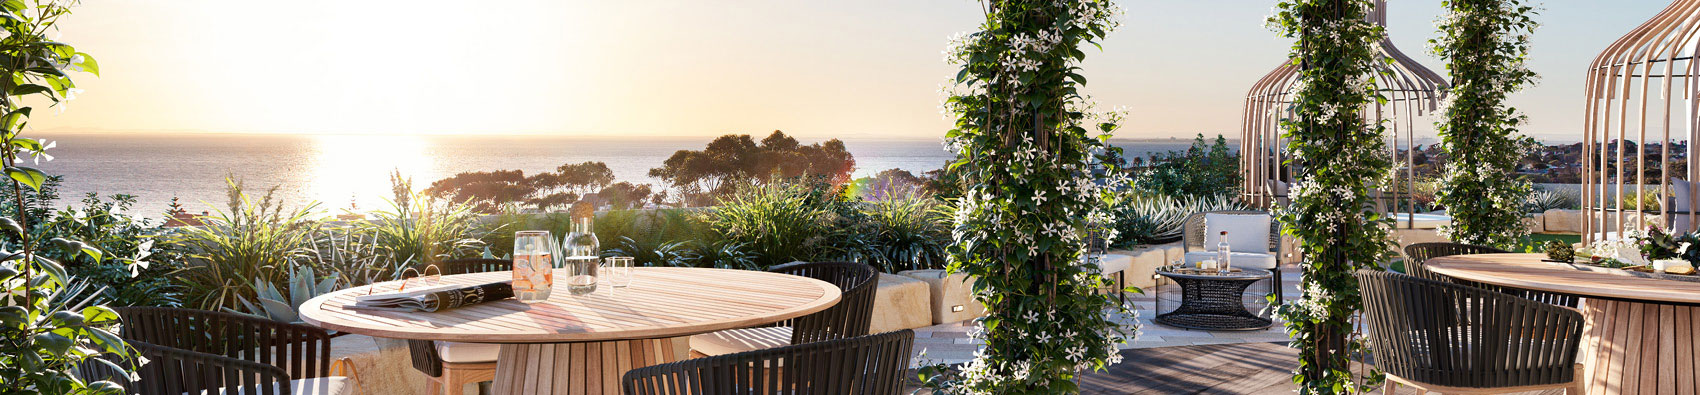 An outdoor dining area with tables, chairs, and plants overlooking the sea.